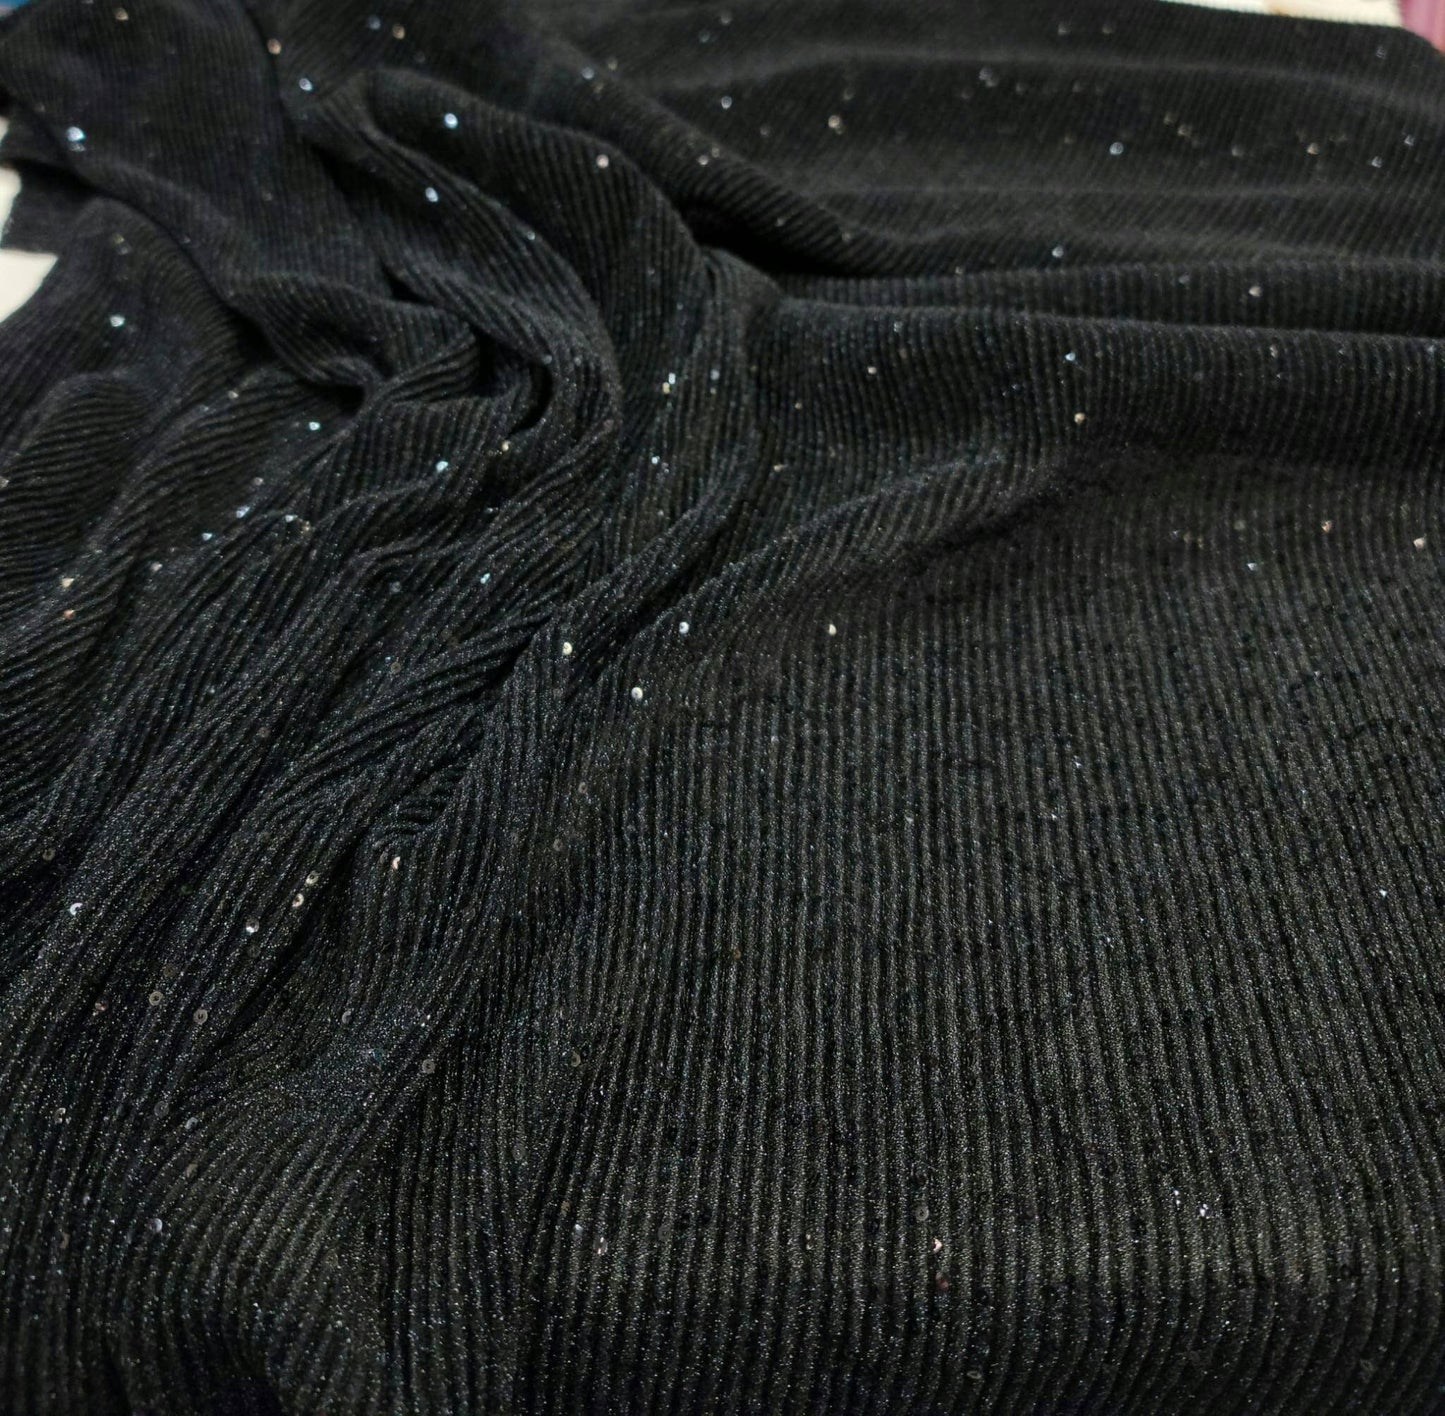 Black Textured Pleated Sequin Spandex 4 Way Stretch Fabric Sold by the Yard Gown Prom Dress Decoration Clothing Soft Knit Fashion Fabric